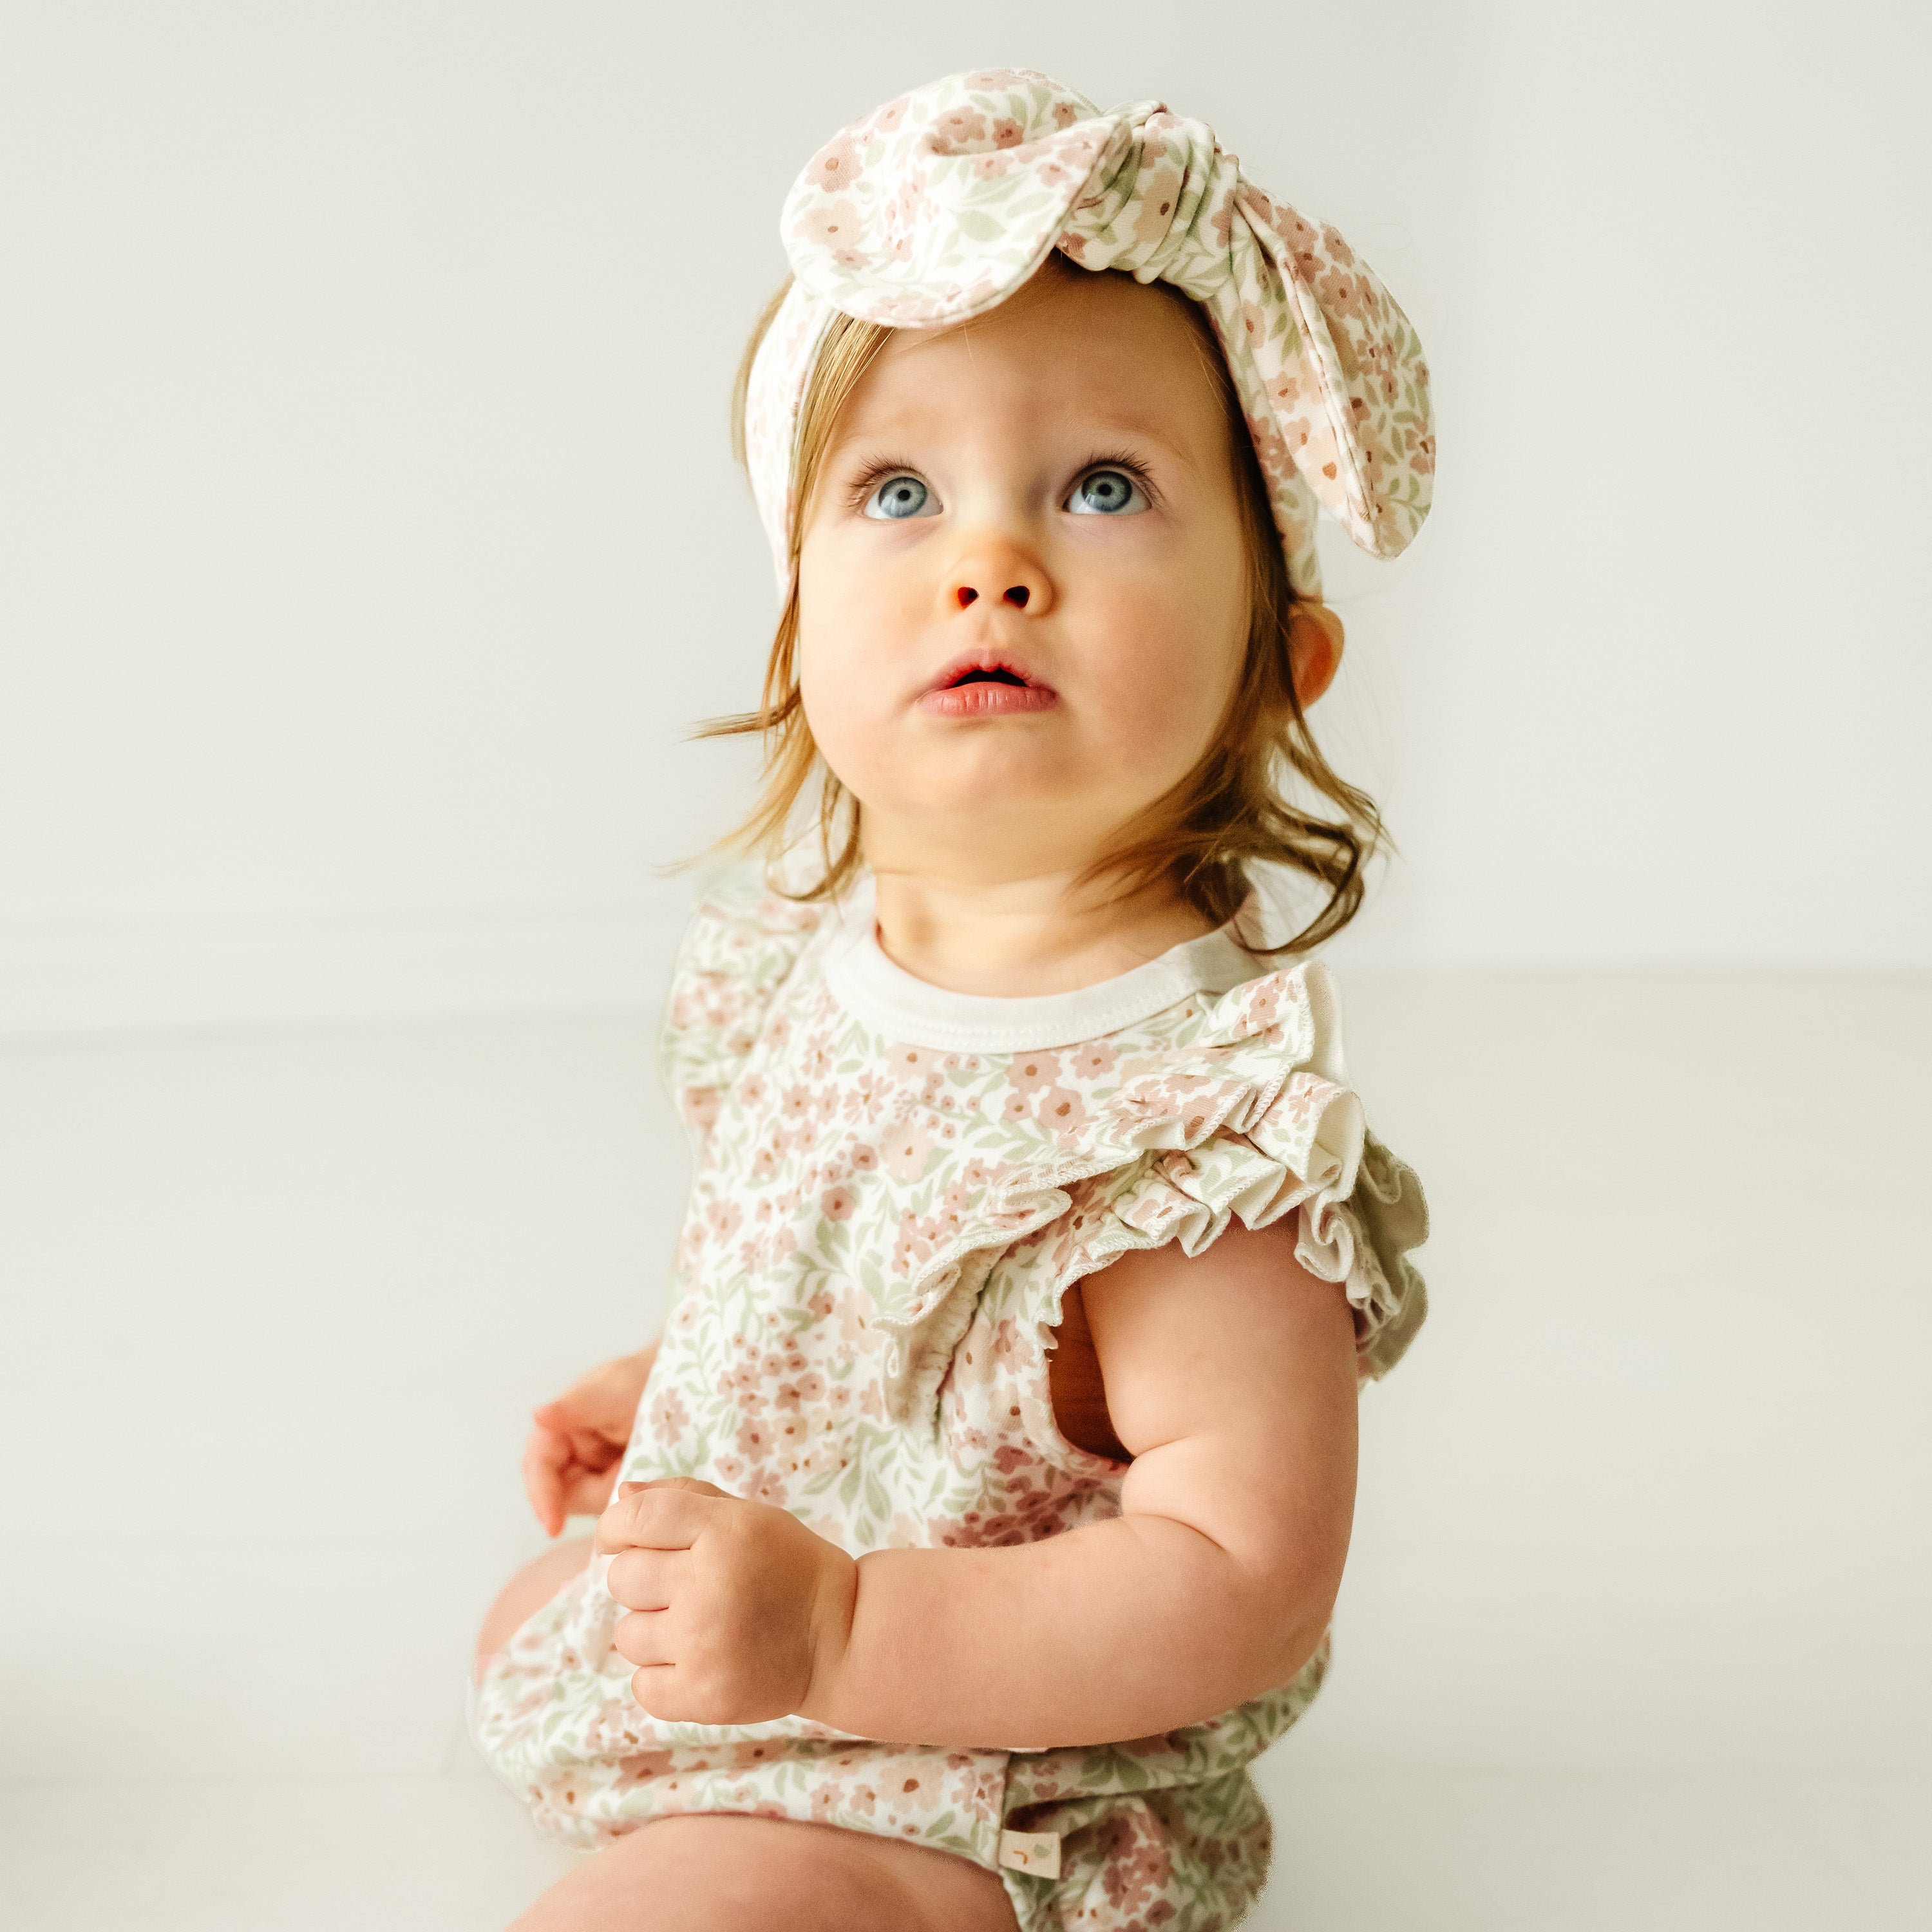 A baby with wide blue eyes and light hair, wearing a Makemake Organics Organic Flutter Bubble Onesie in Summer Floral and a matching bow headband, sits against a white background and looks upwards.